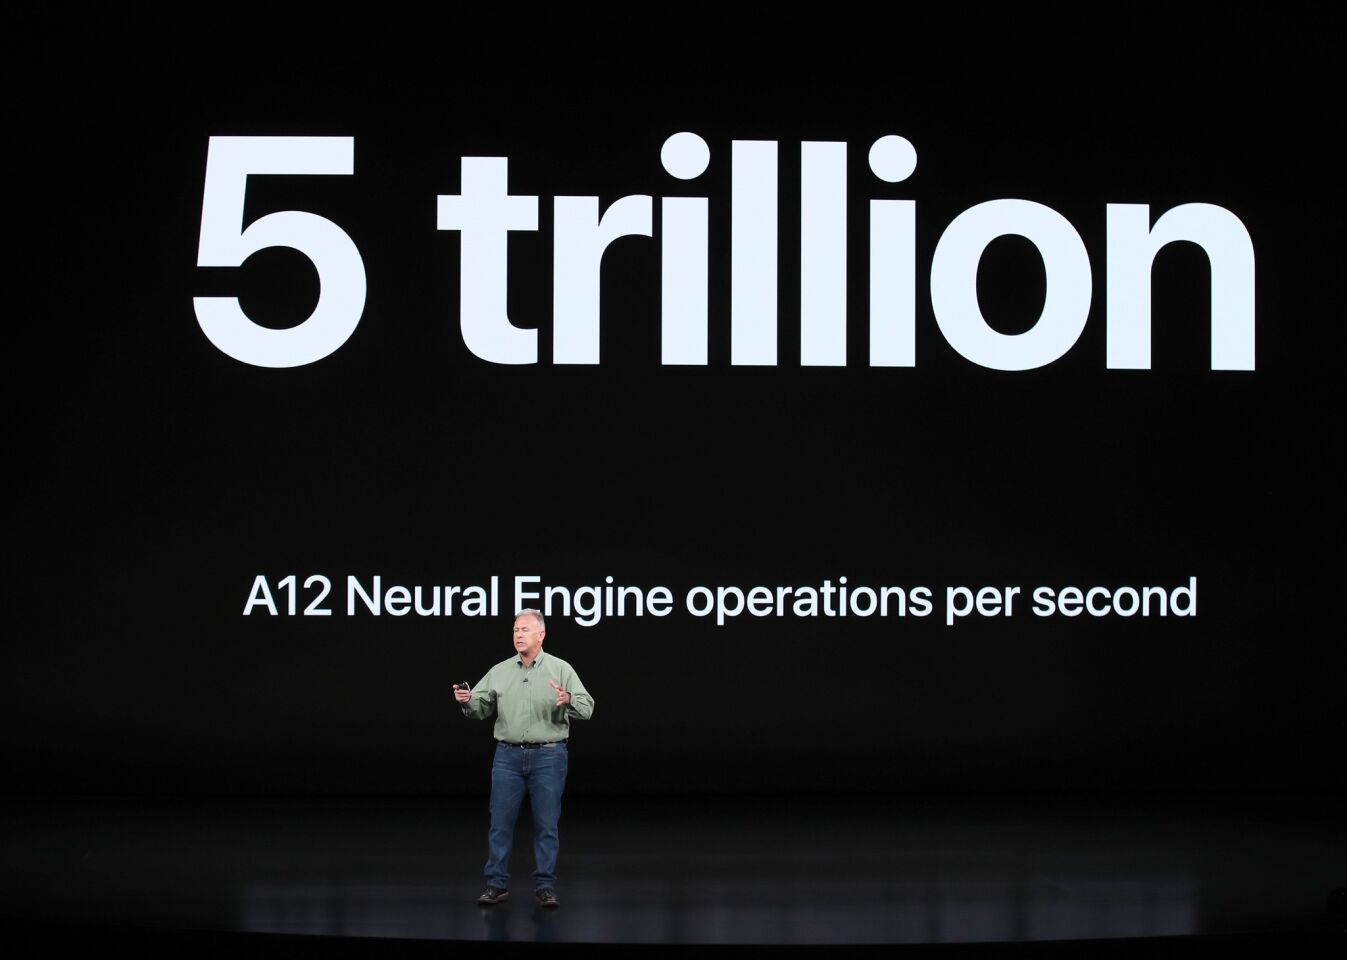 CUPERTINO, CALIFORNIA - SEPTEMBER 11: Phil Schiller, senior vice president of worldwide marketing at Apple Inc., speaks at an Apple event at the Steve Jobs Theater at Apple Park on September 12, 2018 in Cupertino, California. Apple is expected to announce new iPhones with larger screens as well as other product upgrades.